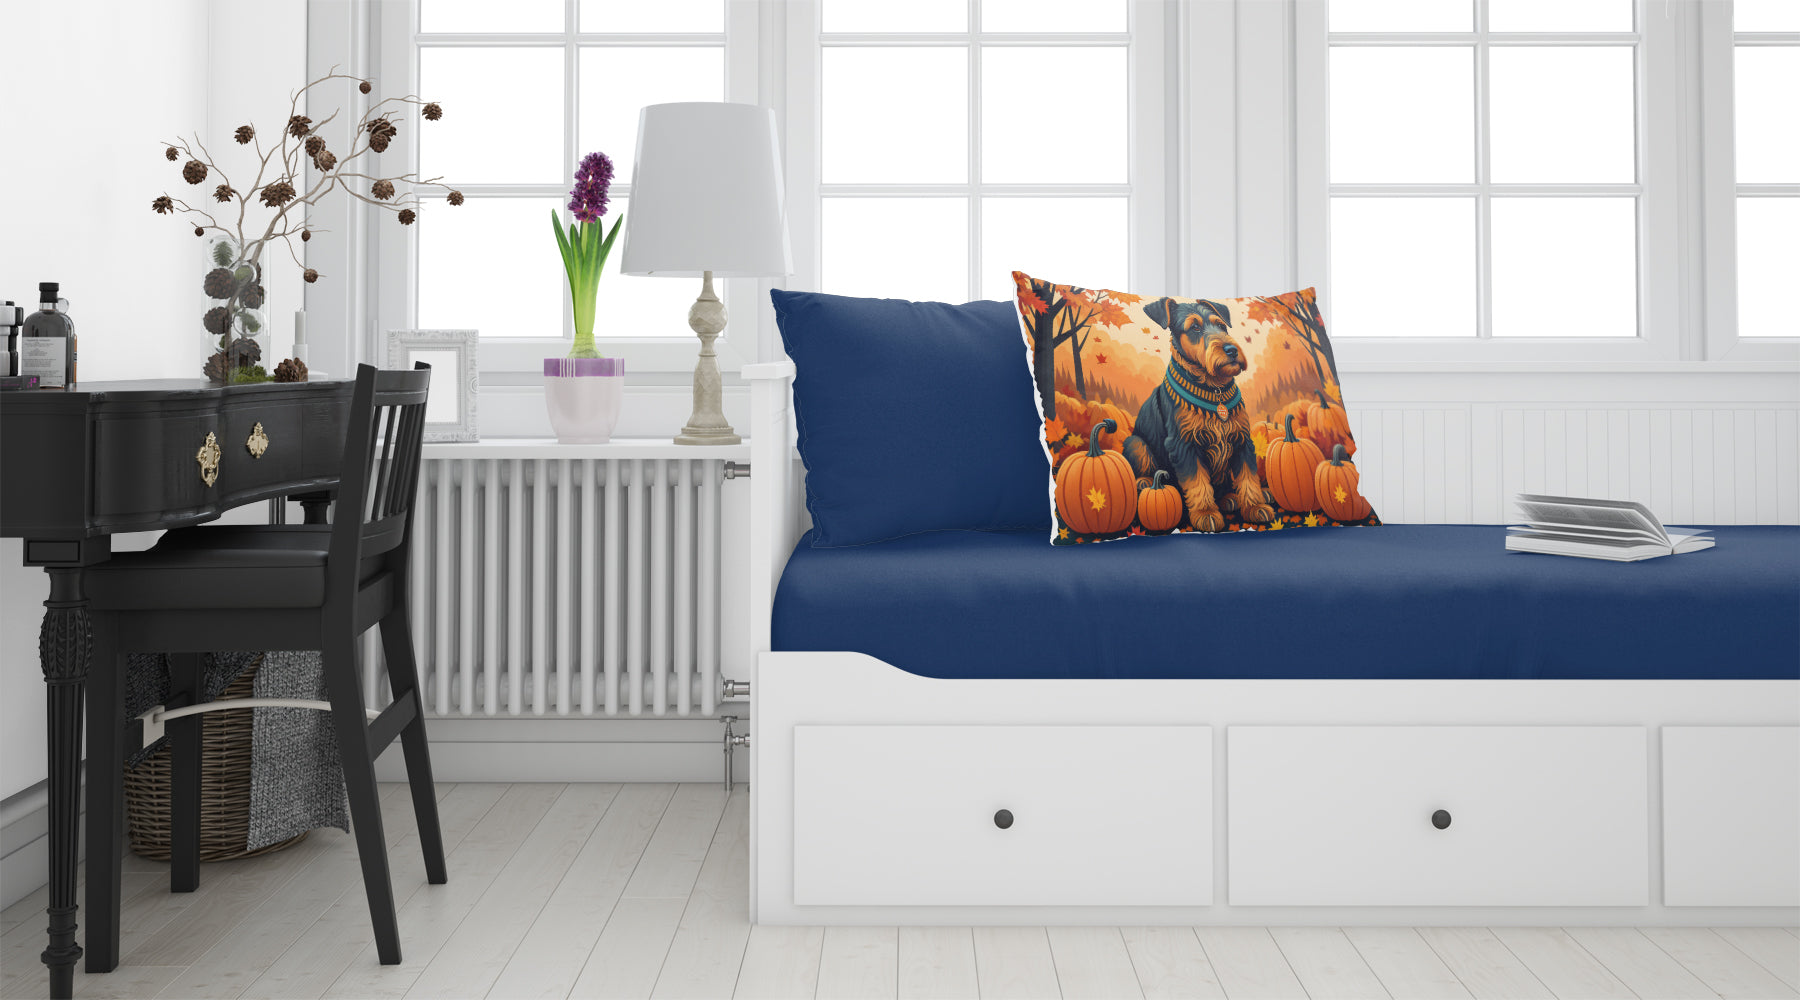 Buy this Airedale Terrier Fall Fabric Standard Pillowcase